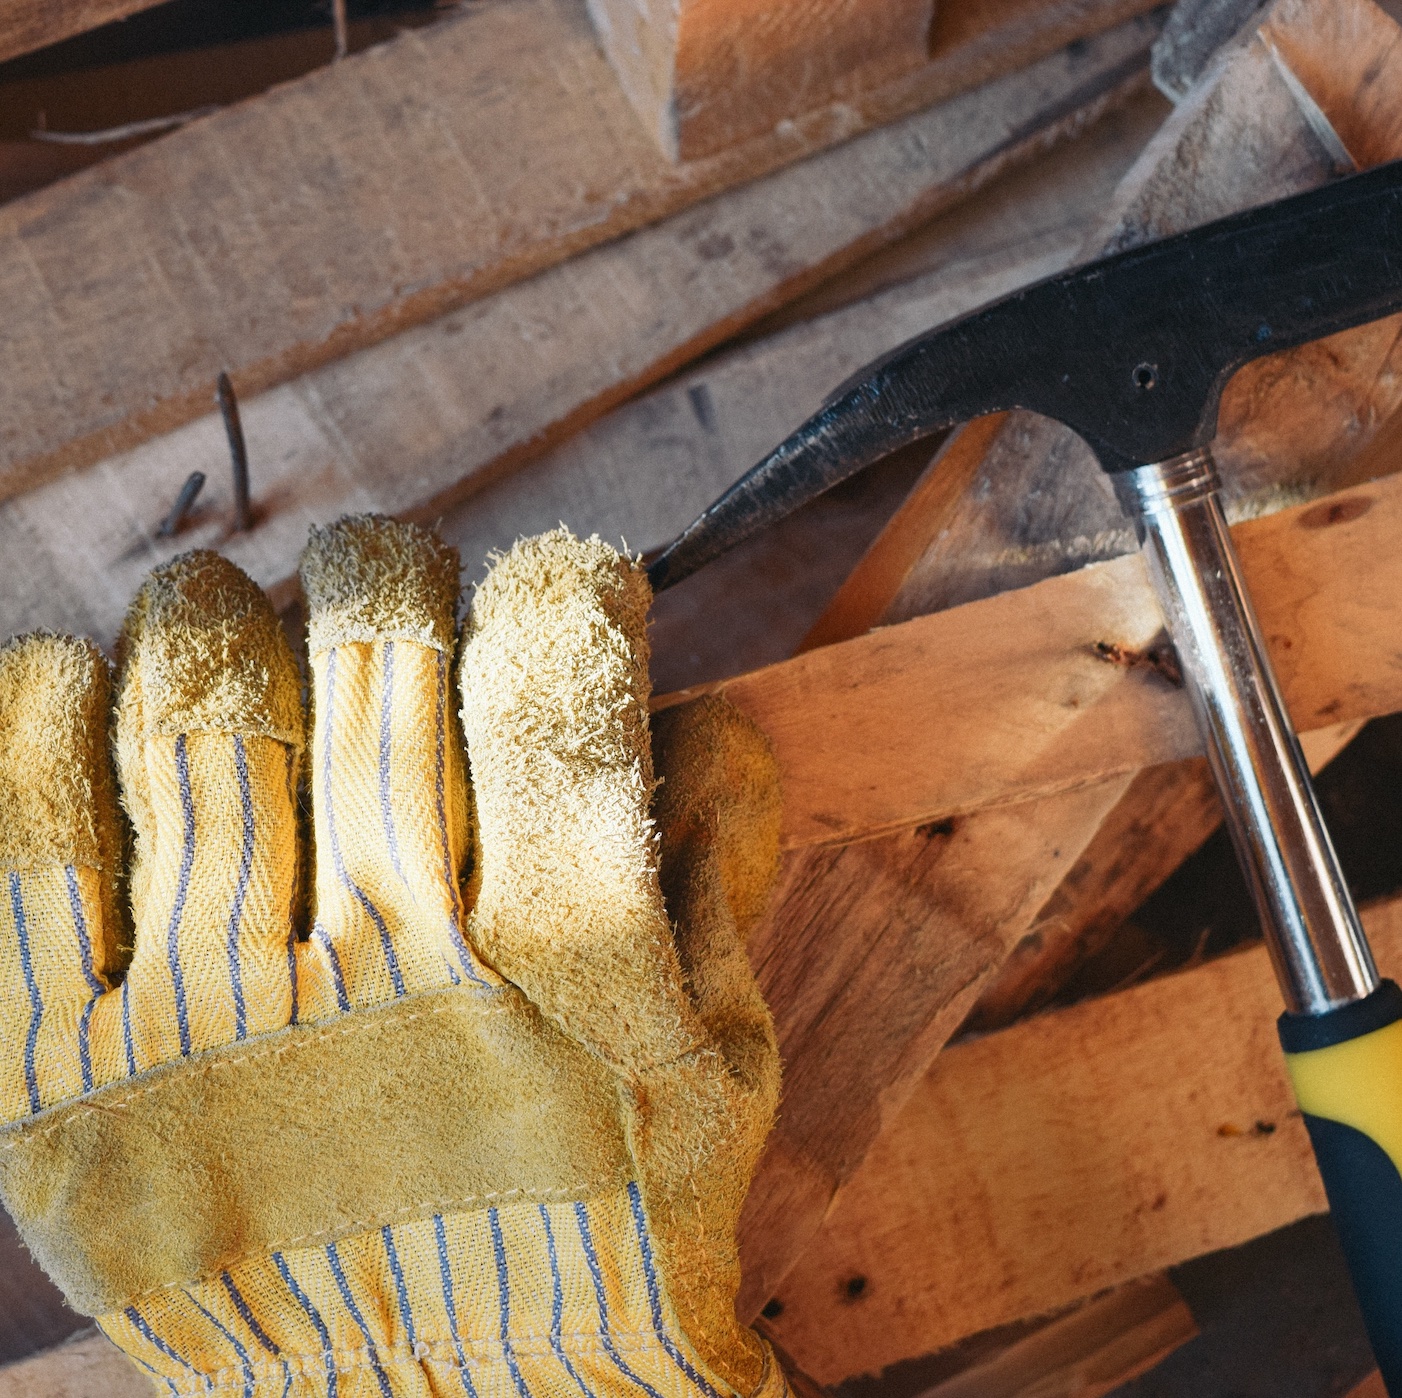 Work glove and hammer atop wood with nails poking out; image by Not Fabrik, via Unsplash.com.